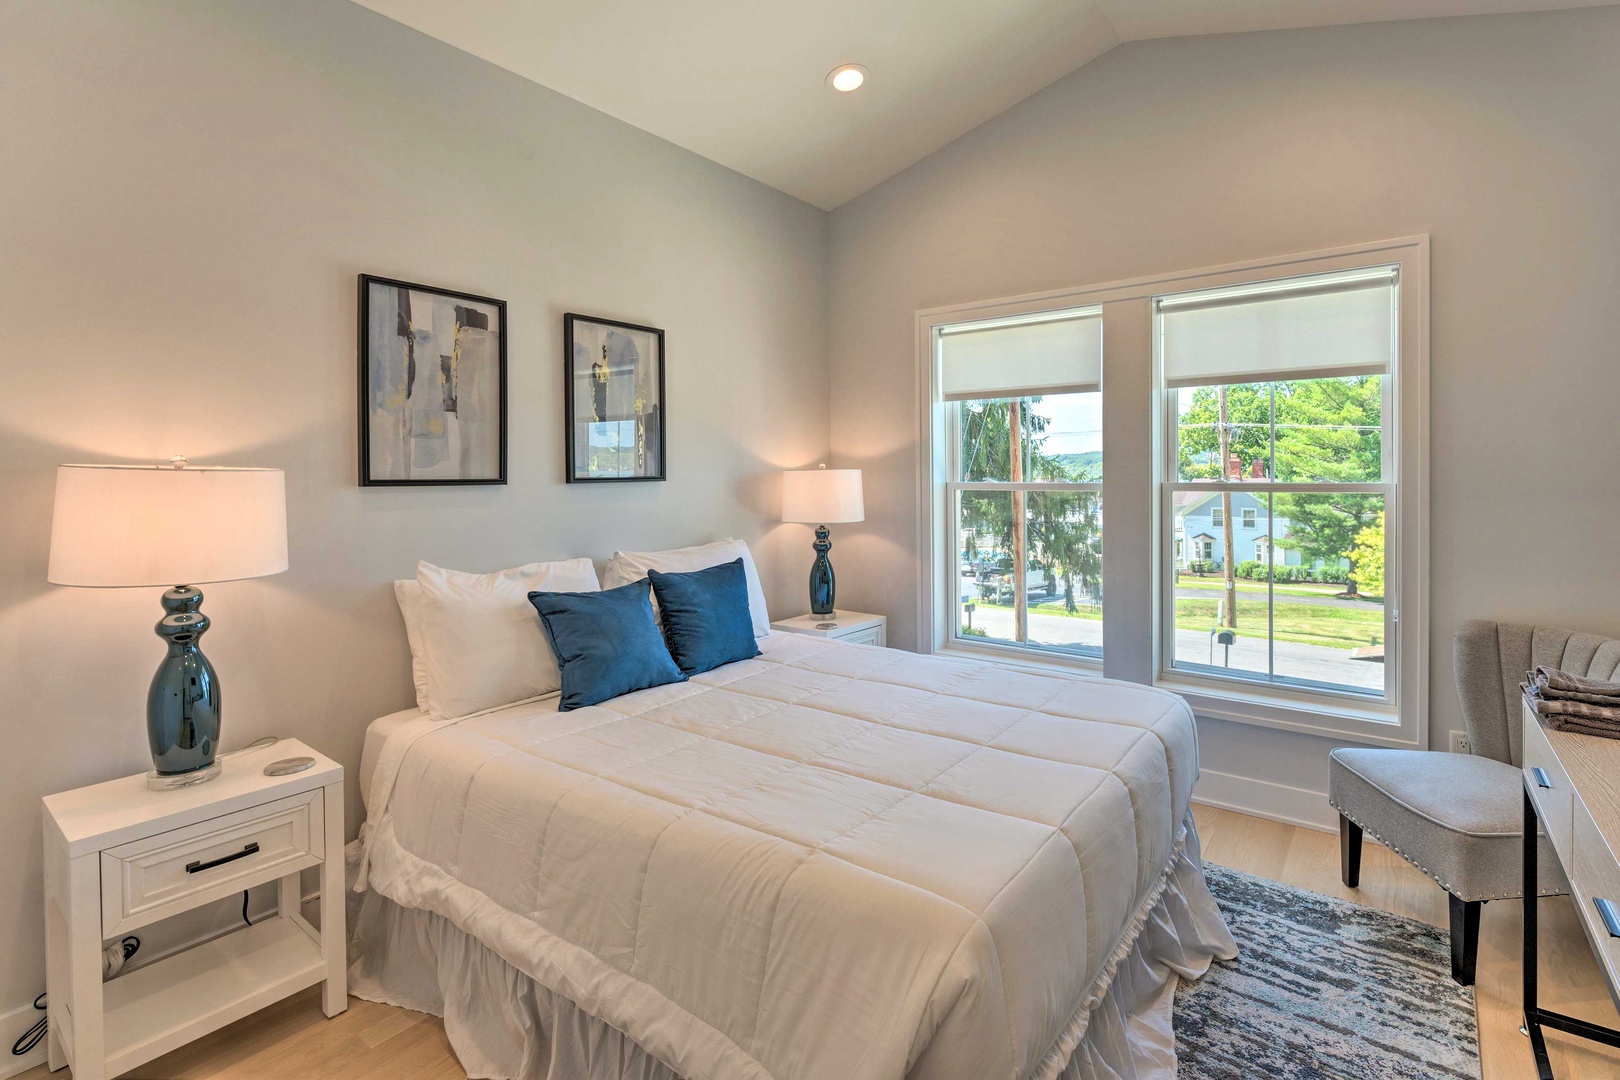 The final stylish bedroom includes a queen-sized bed & Smart TV